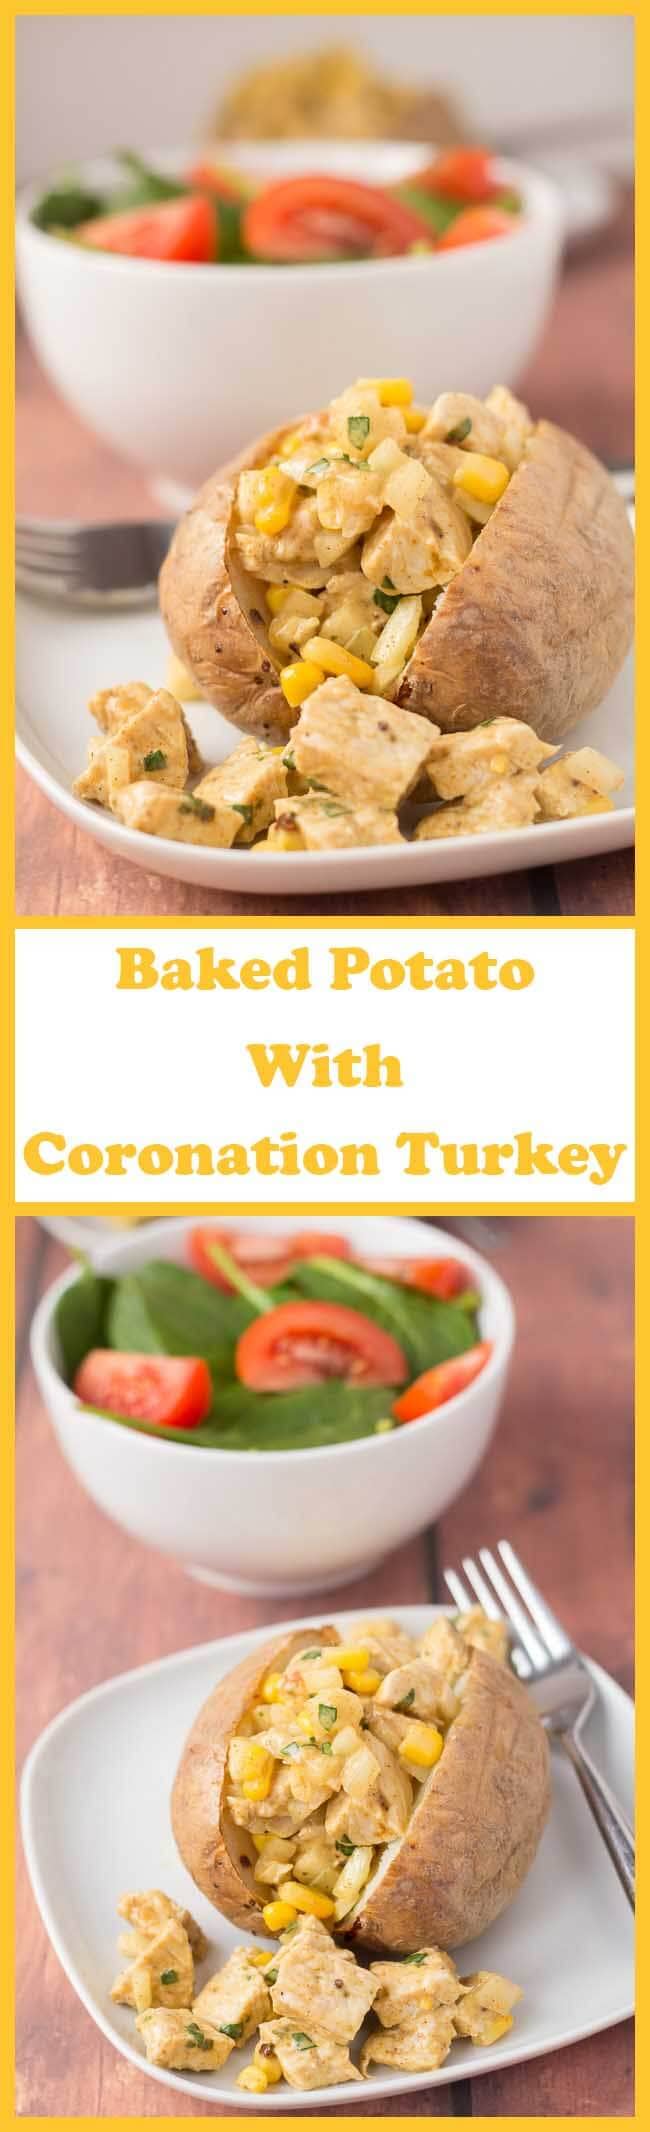 This baked potato with Coronation turkey recipe makes for a delicious quick healthy meal. Based on the classic Coronation chicken with fresh and lightly spiced flavours it's a great way of using up leftover turkey too.